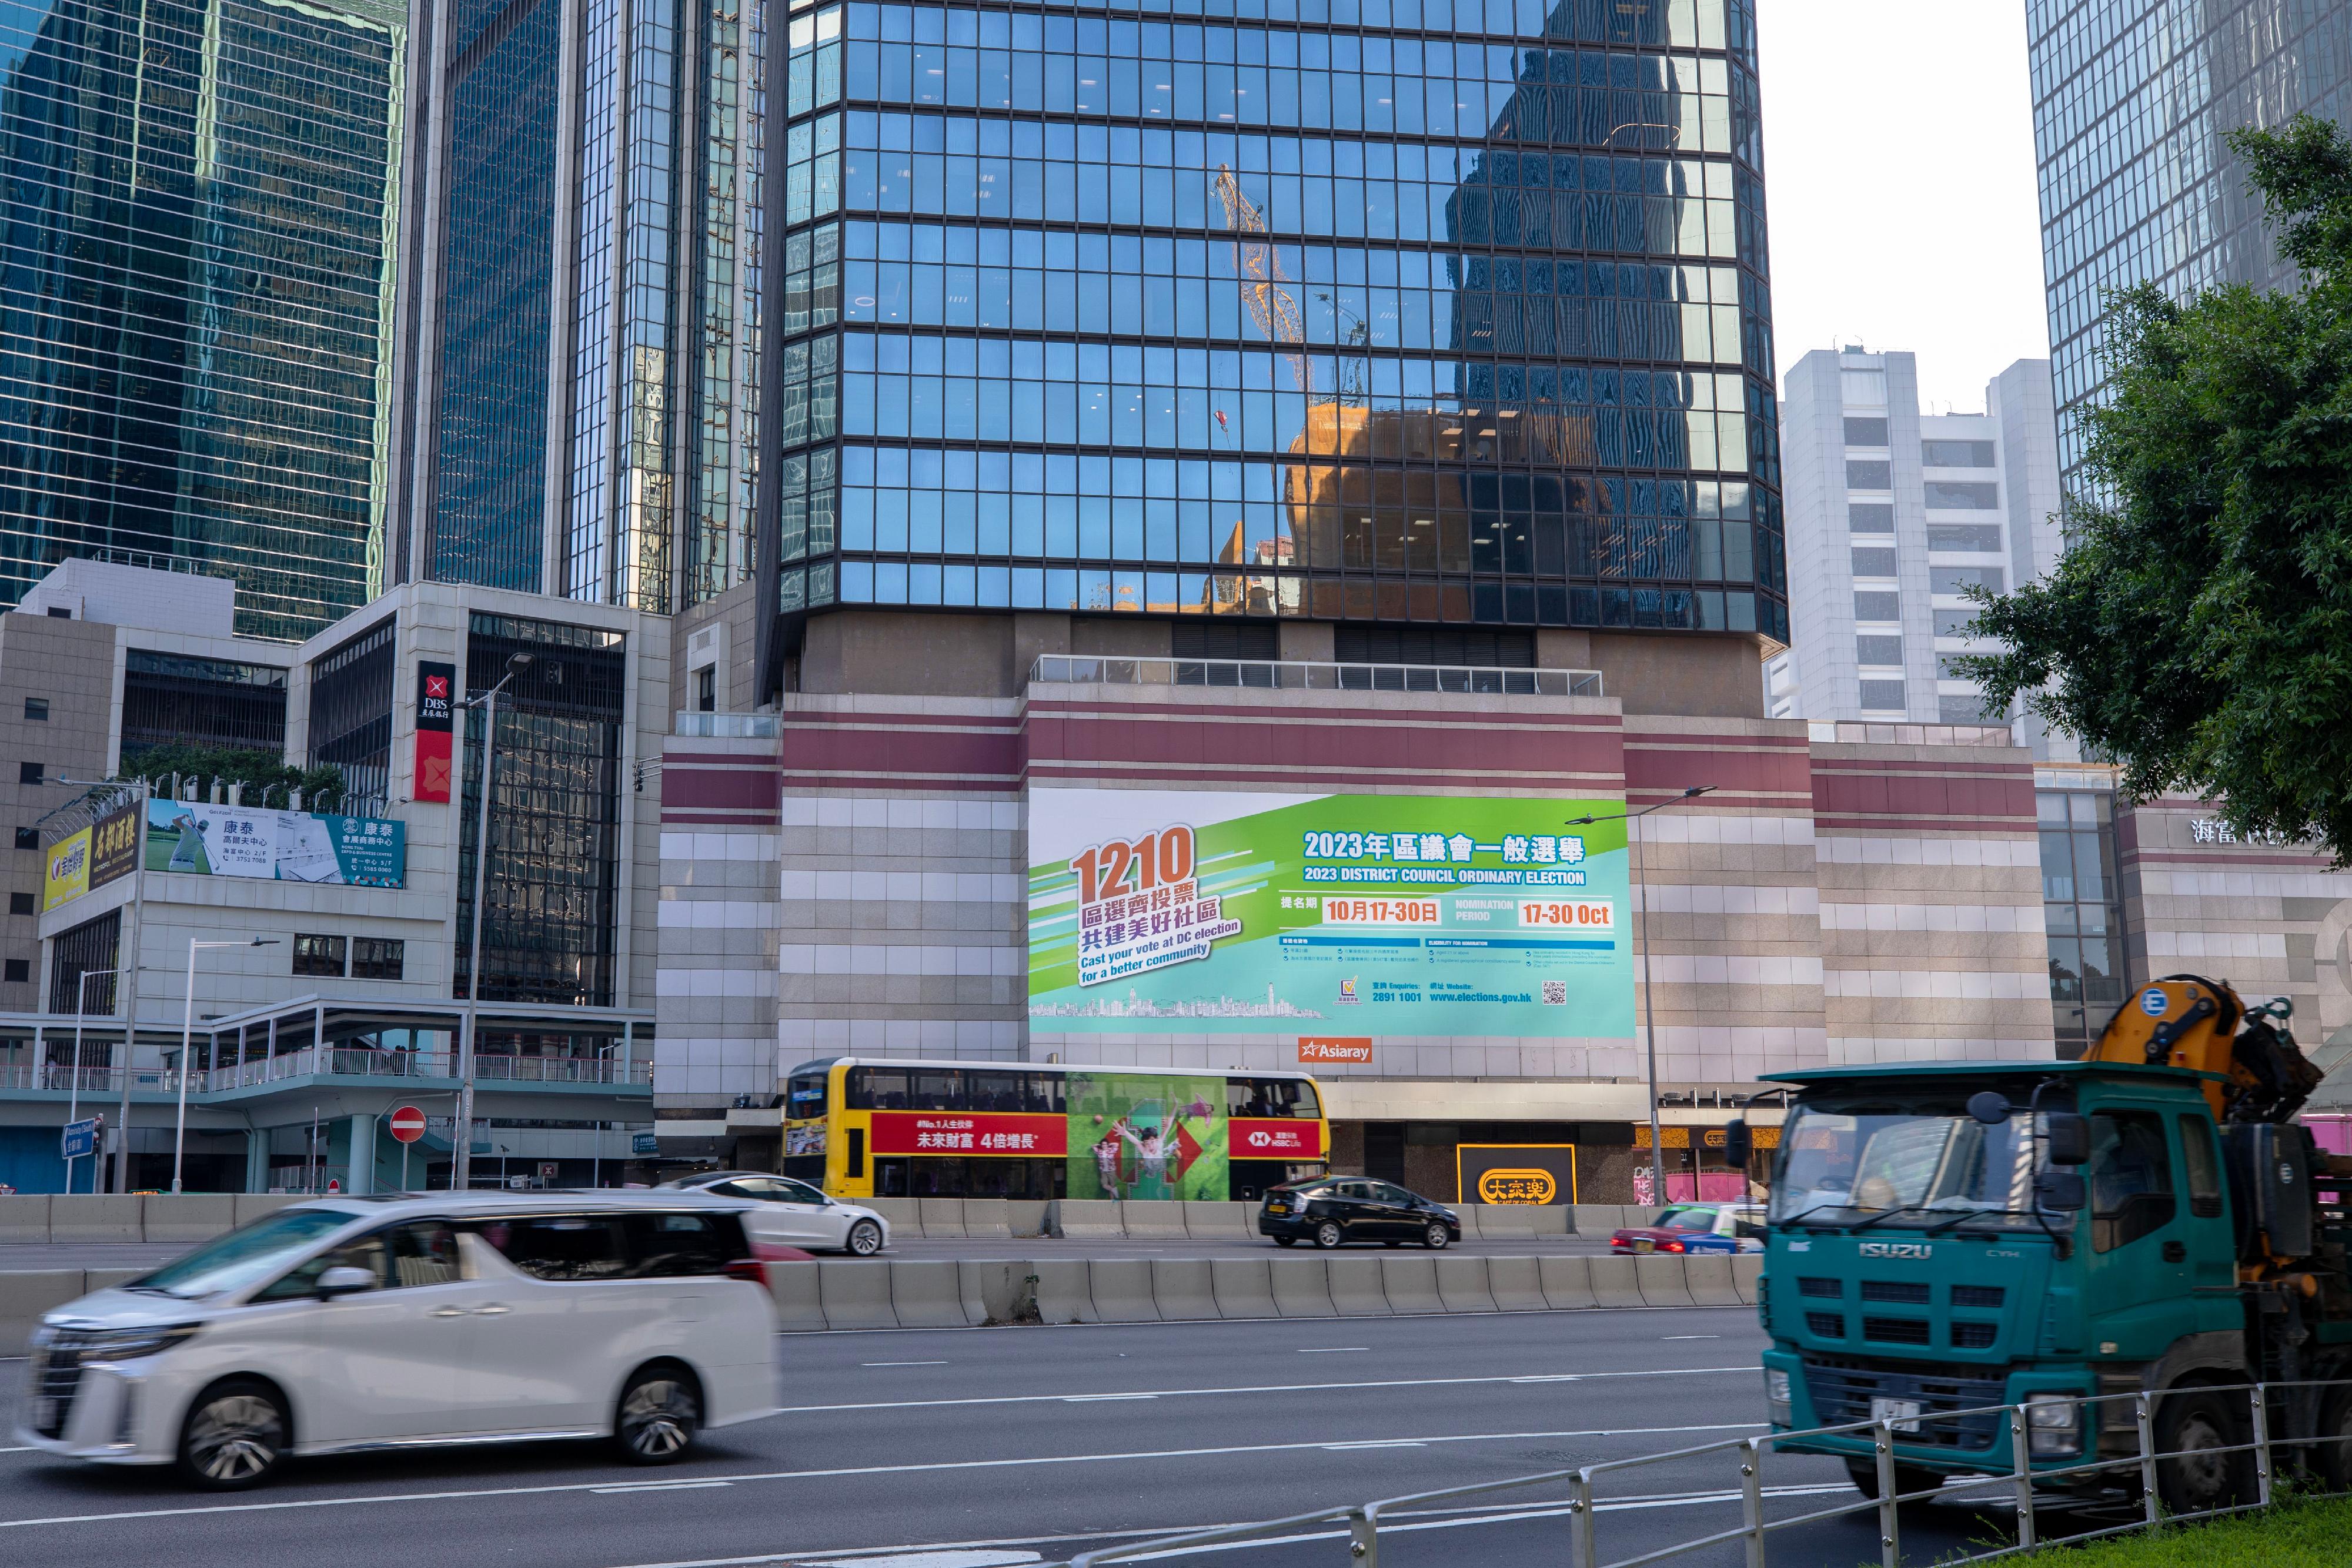 The 2023 District Council Ordinary Election will be held on December 10 (Sunday). The nomination period for the election started on October 17, and will continue until October 30. The Government has launched a publicity campaign for the nomination period that includes displays of giant banners in different districts.